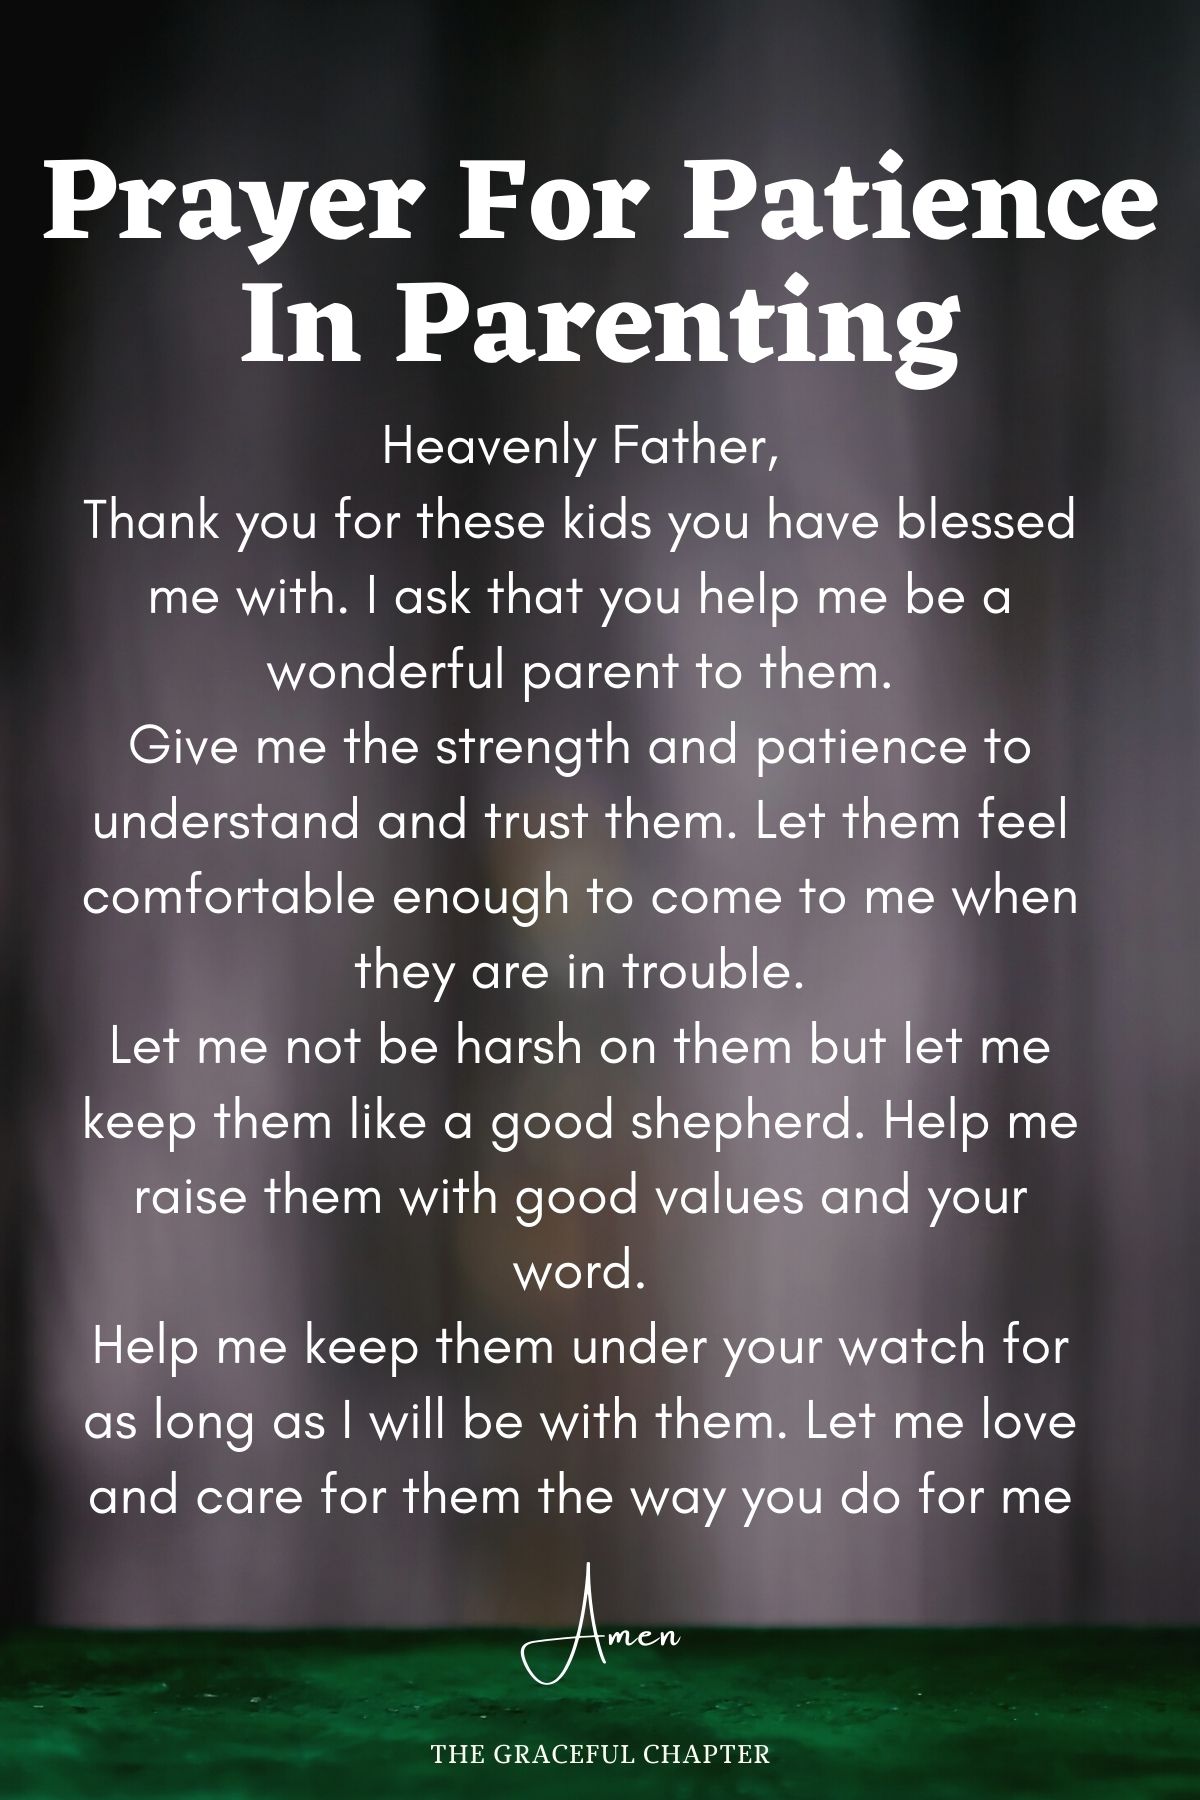 Prayer for patience in parenting